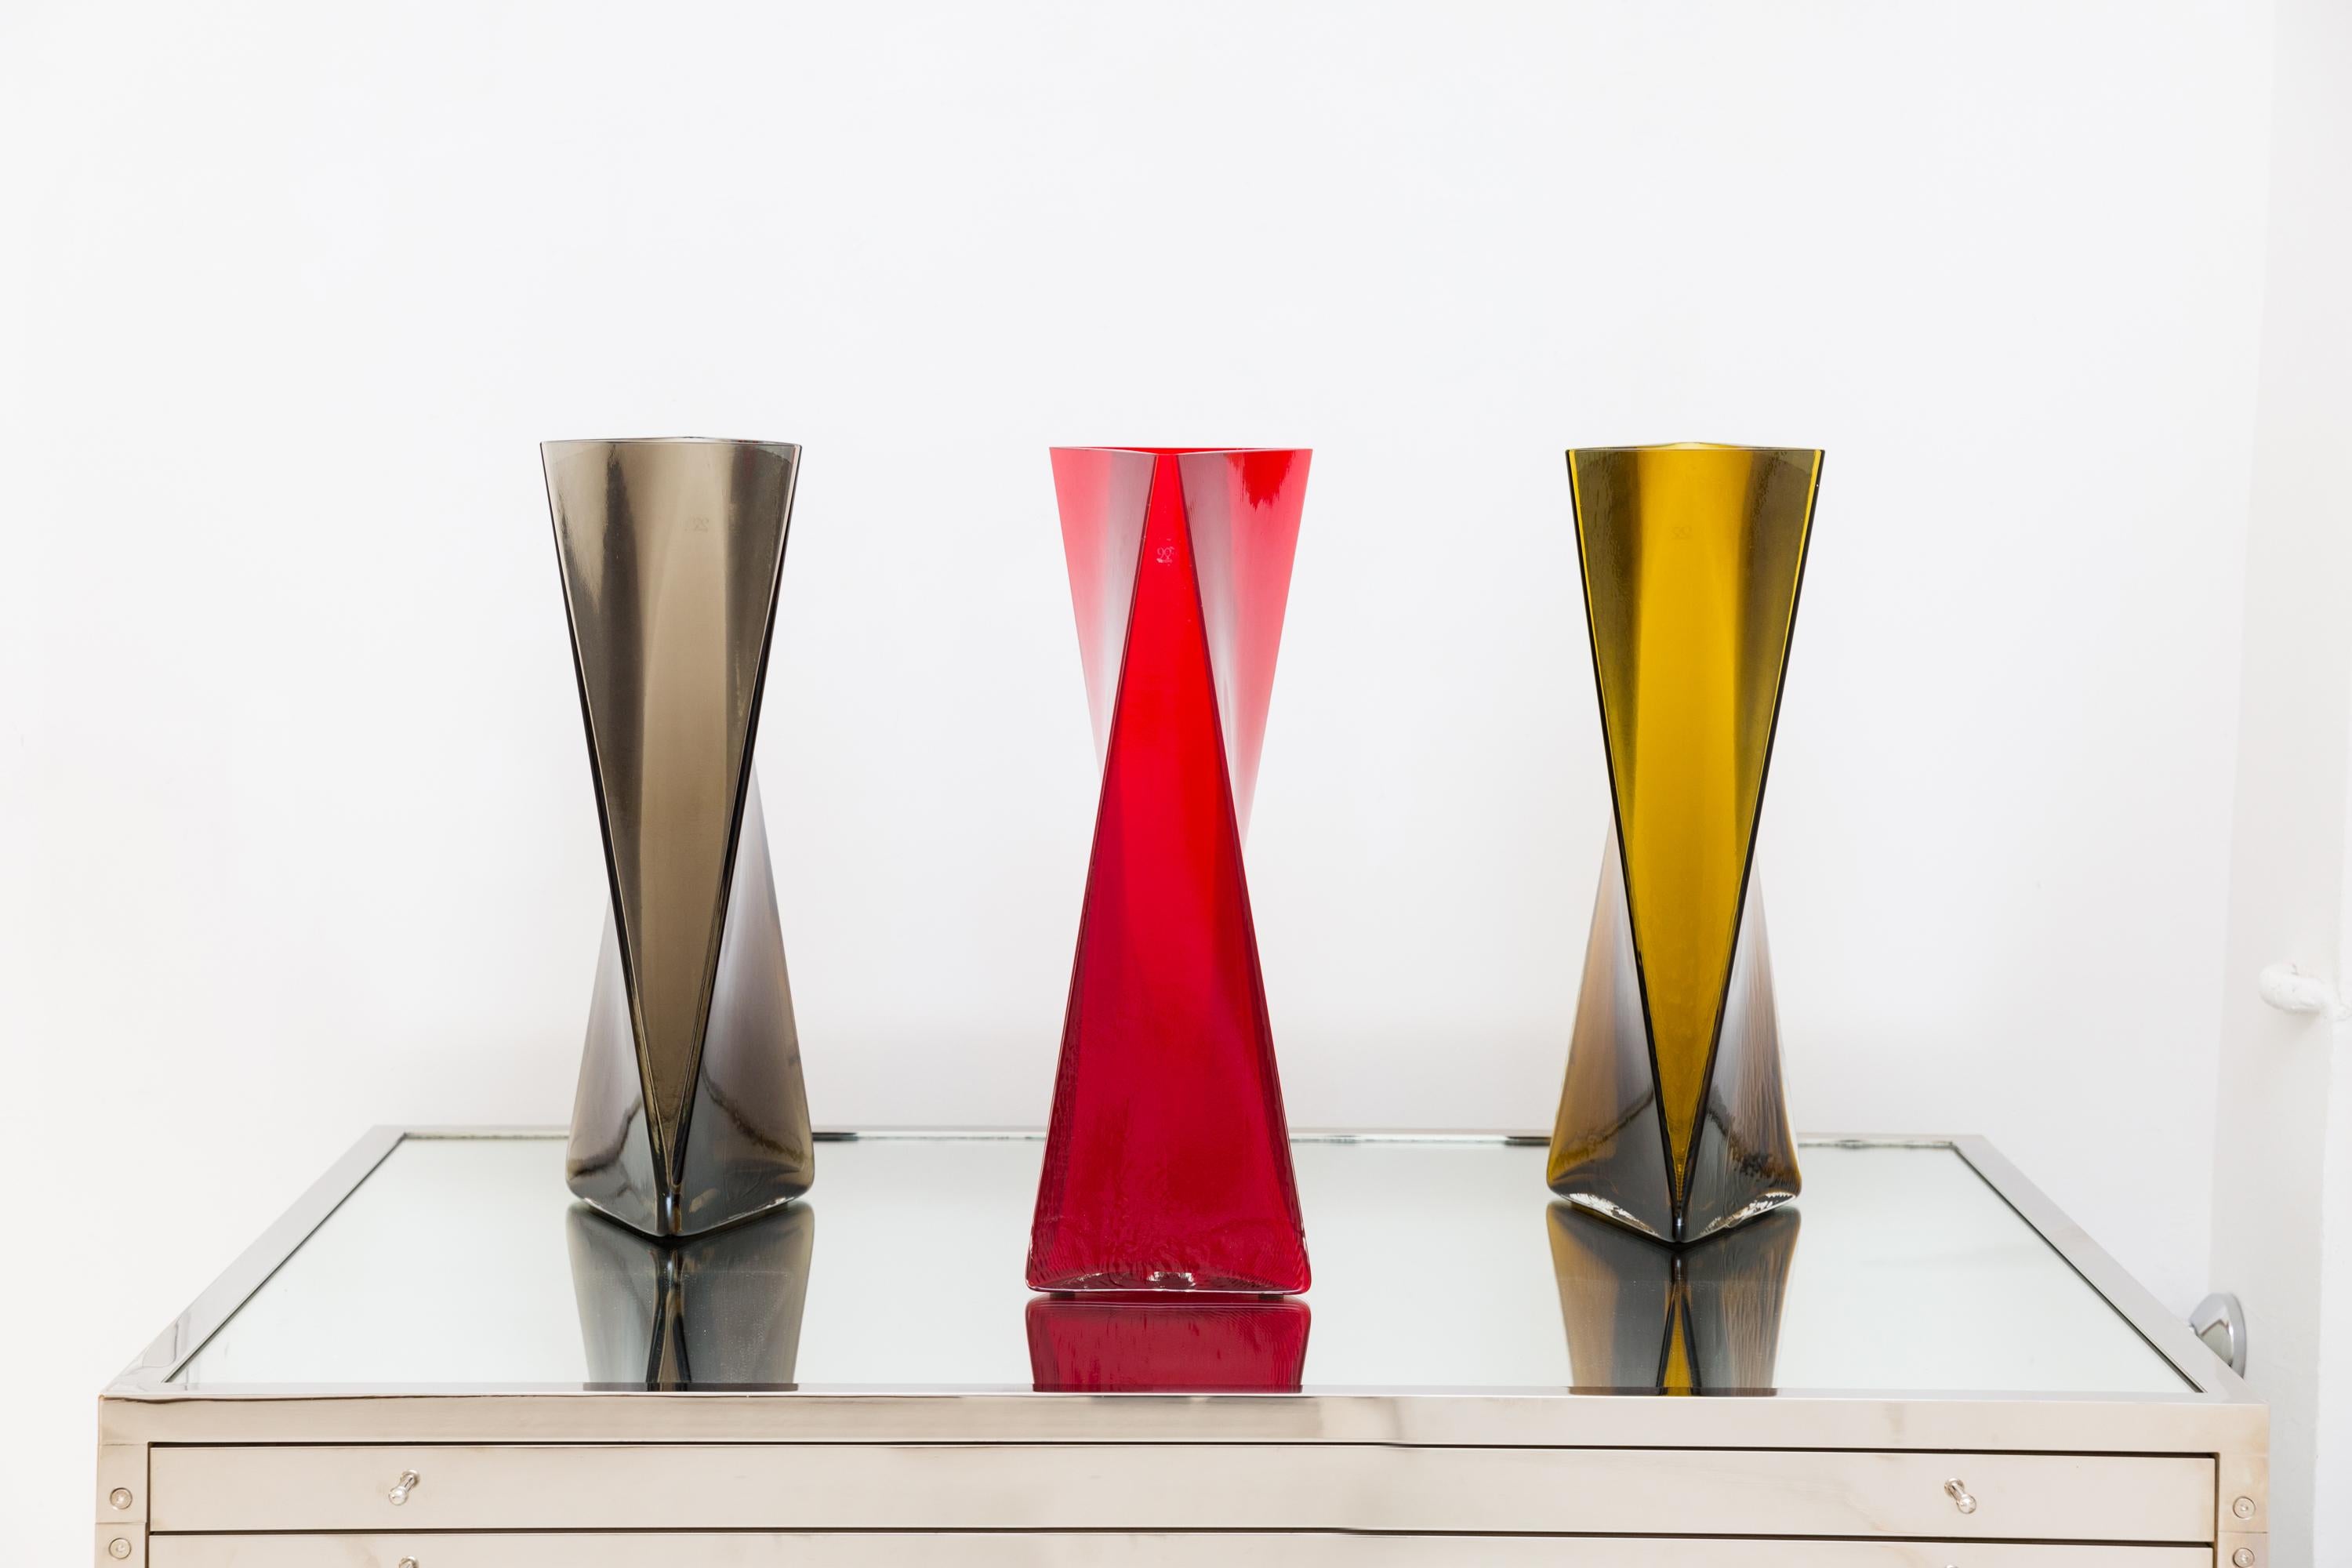 Three Vases, Té, Talpa Et Rosso Trasparente, 2011
An amazing, iconic set of three glass vases by Tadao Ando for Venini, 2011, signed and dated with certificate. Engraved under the base 90 Venini ANDO and Venini 2011 3/9 PDA and on a self-adhesive